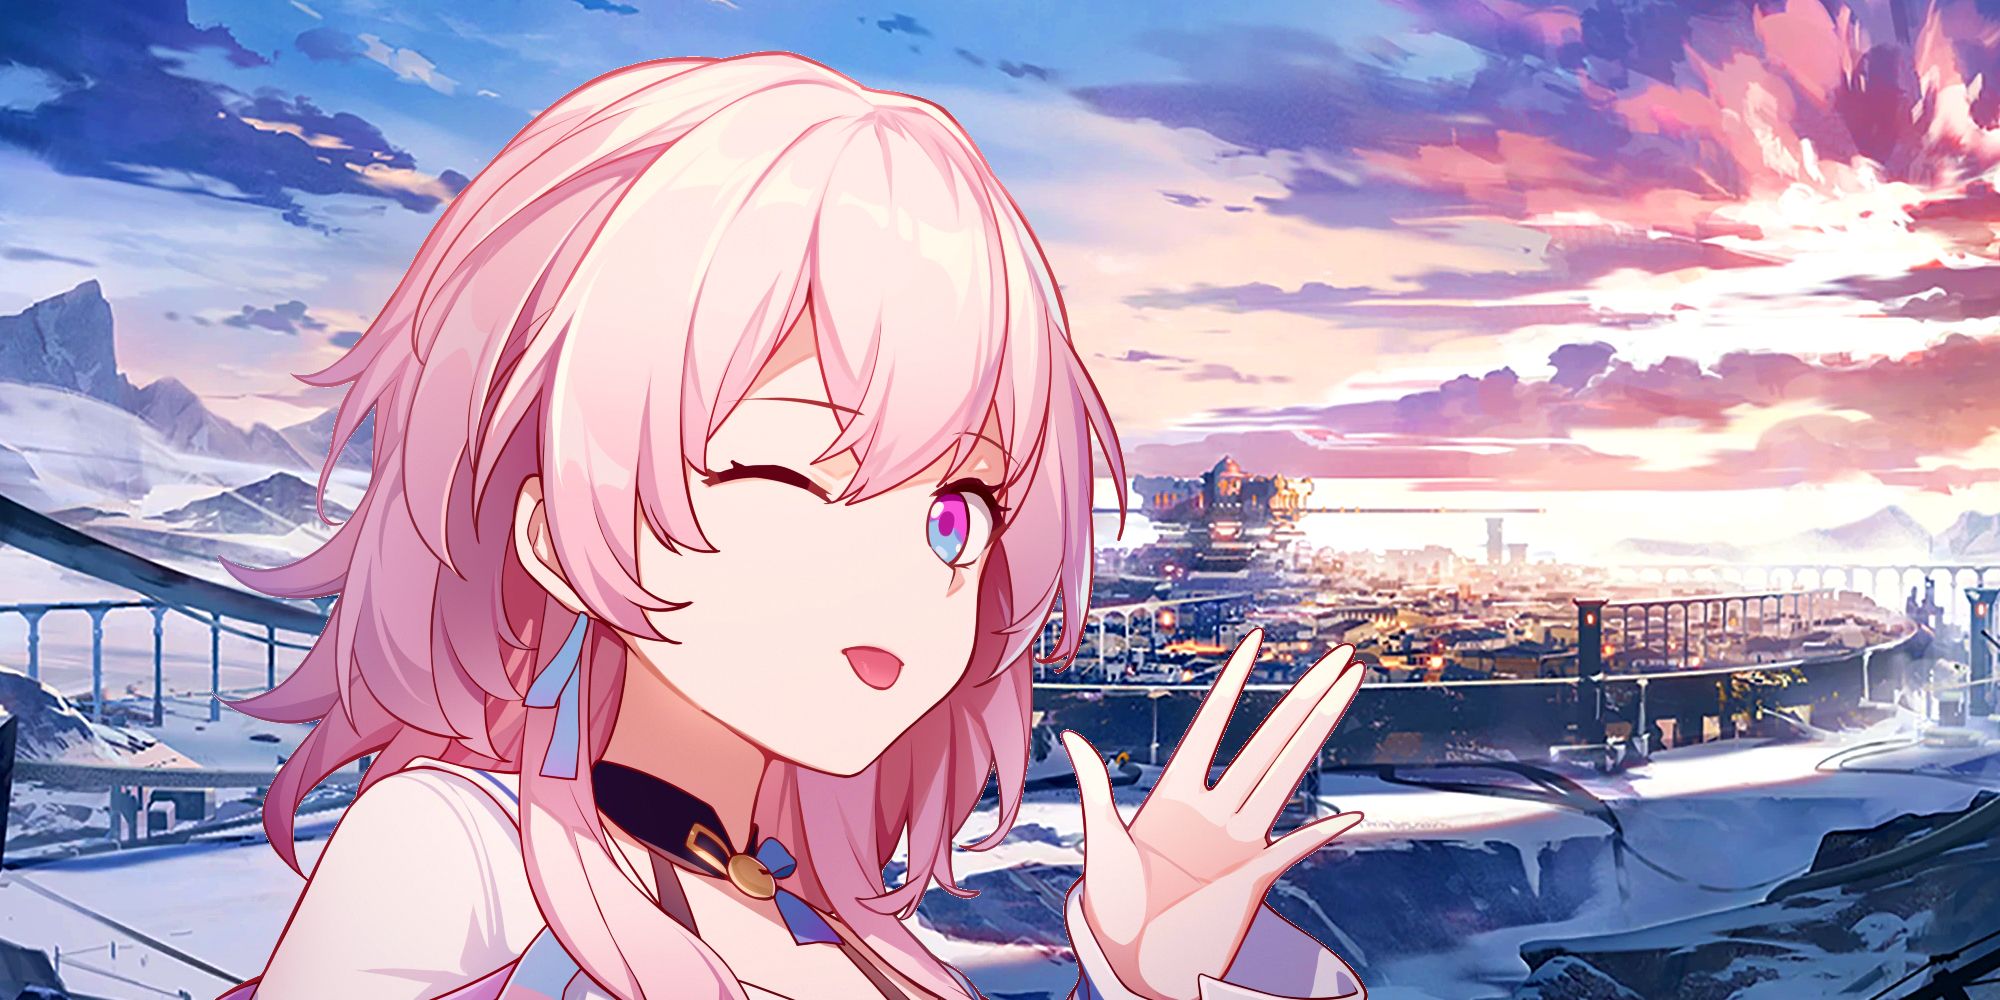 Honkai: Star Rail character March 7th waving and winking at the camera in front of a snowy cityscape in the distance.